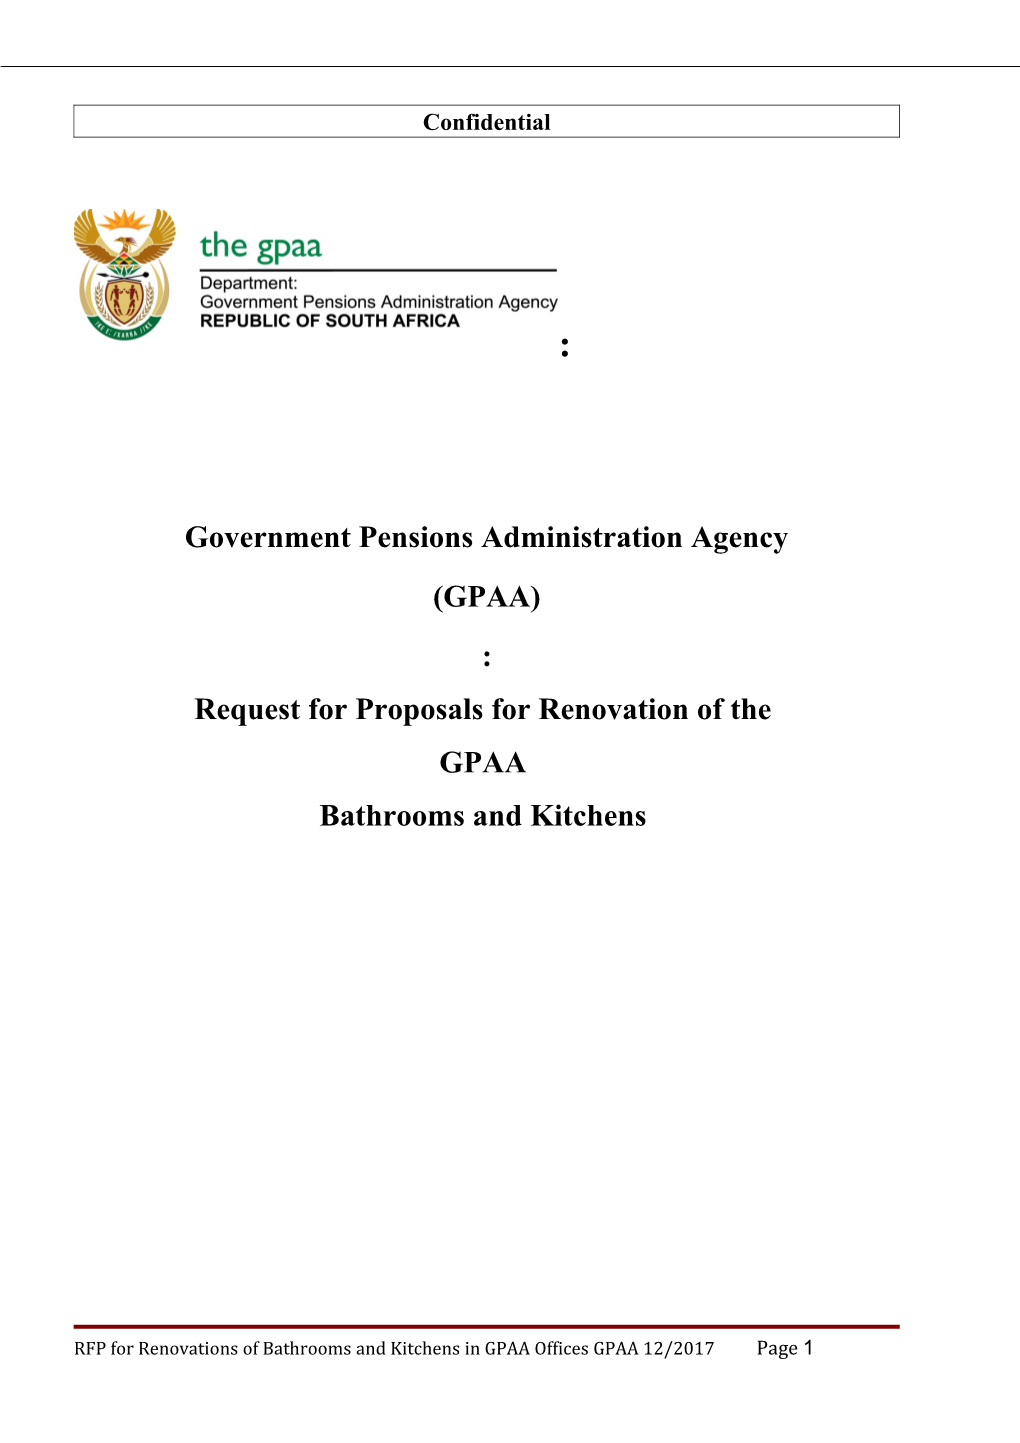 Government Pensions Administration Agency